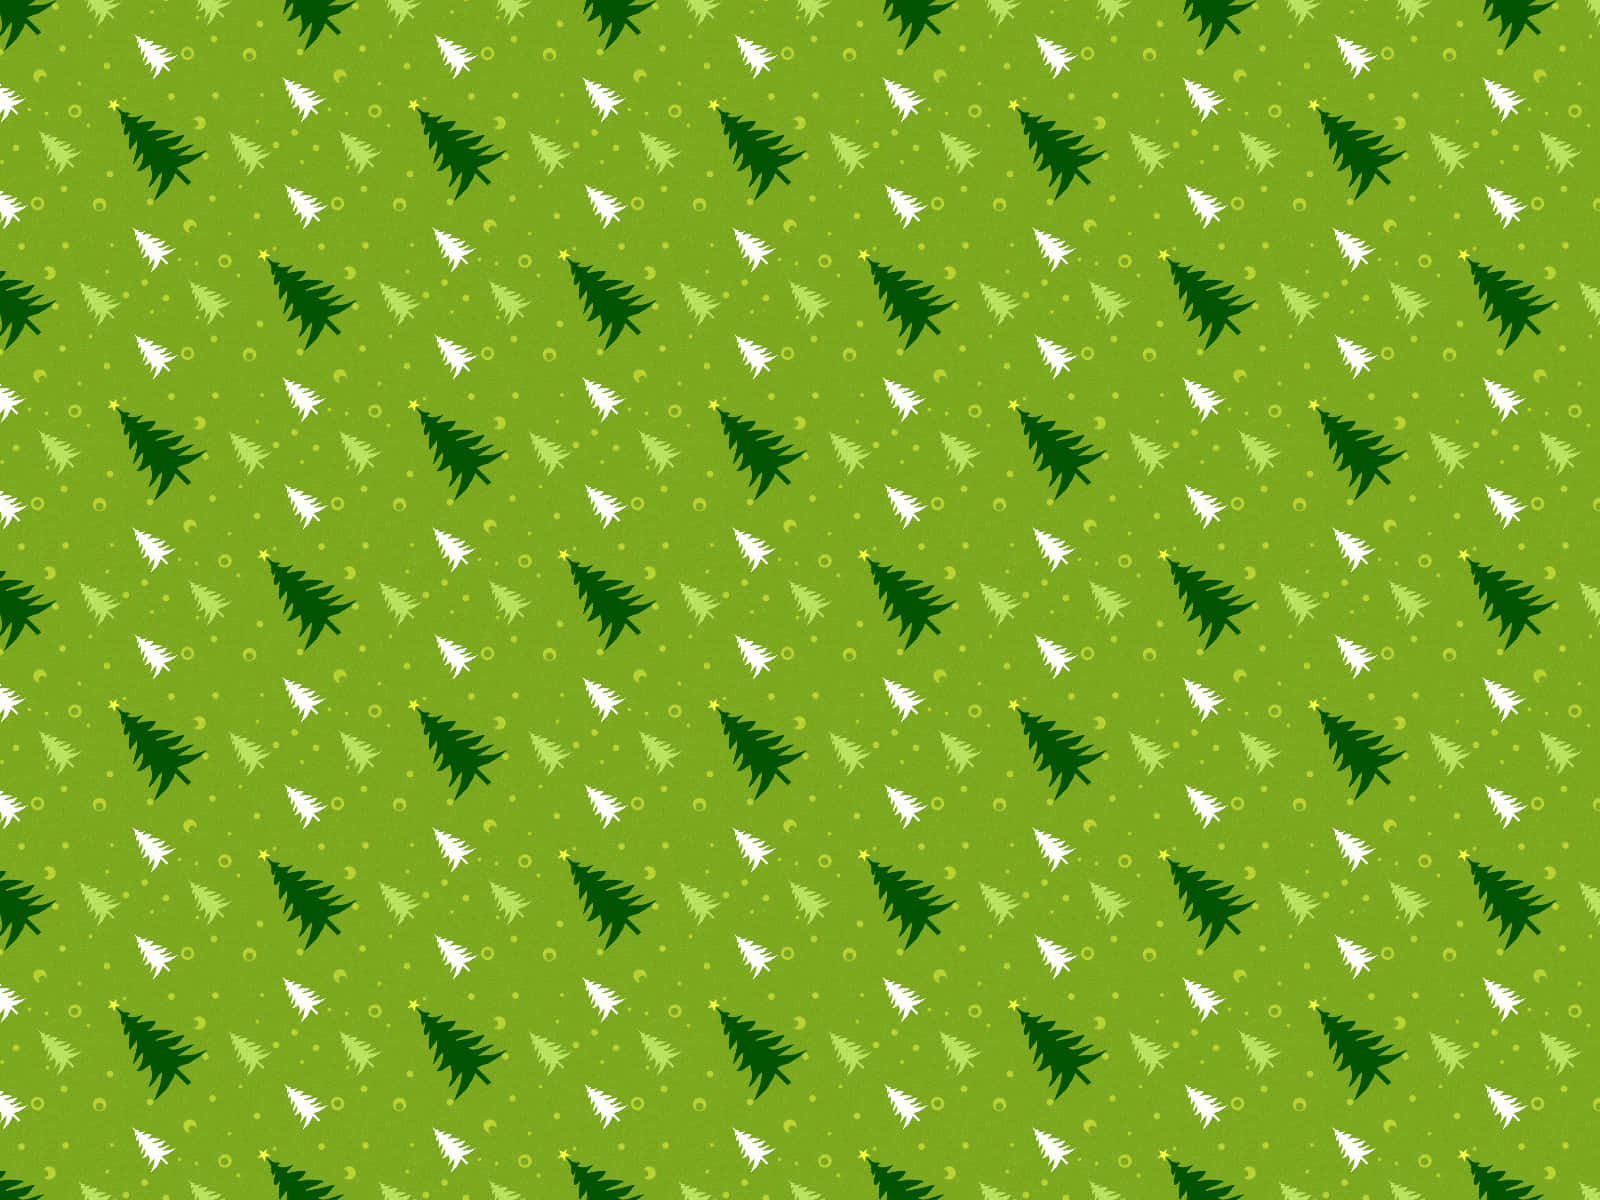 A Green Christmas Tree Pattern With White Dots Wallpaper